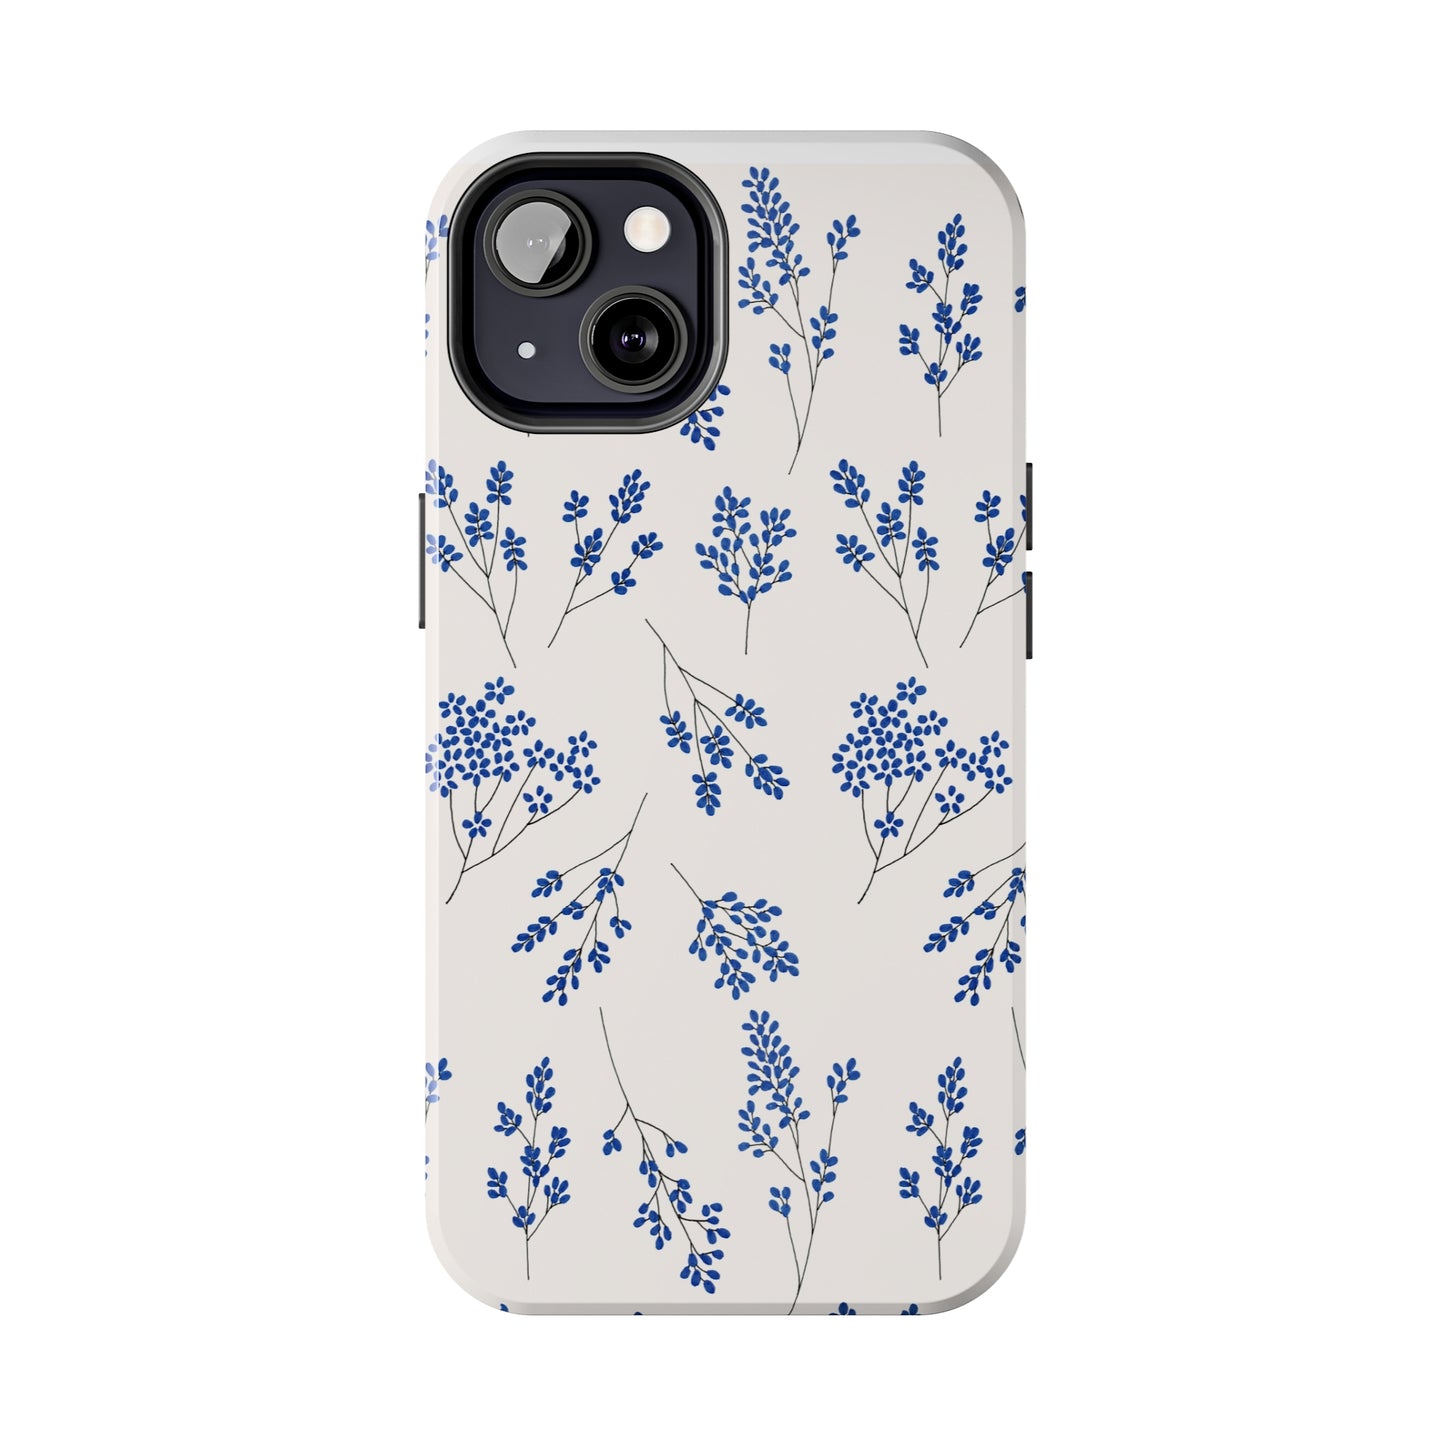 "DAINTY" Phone Cases